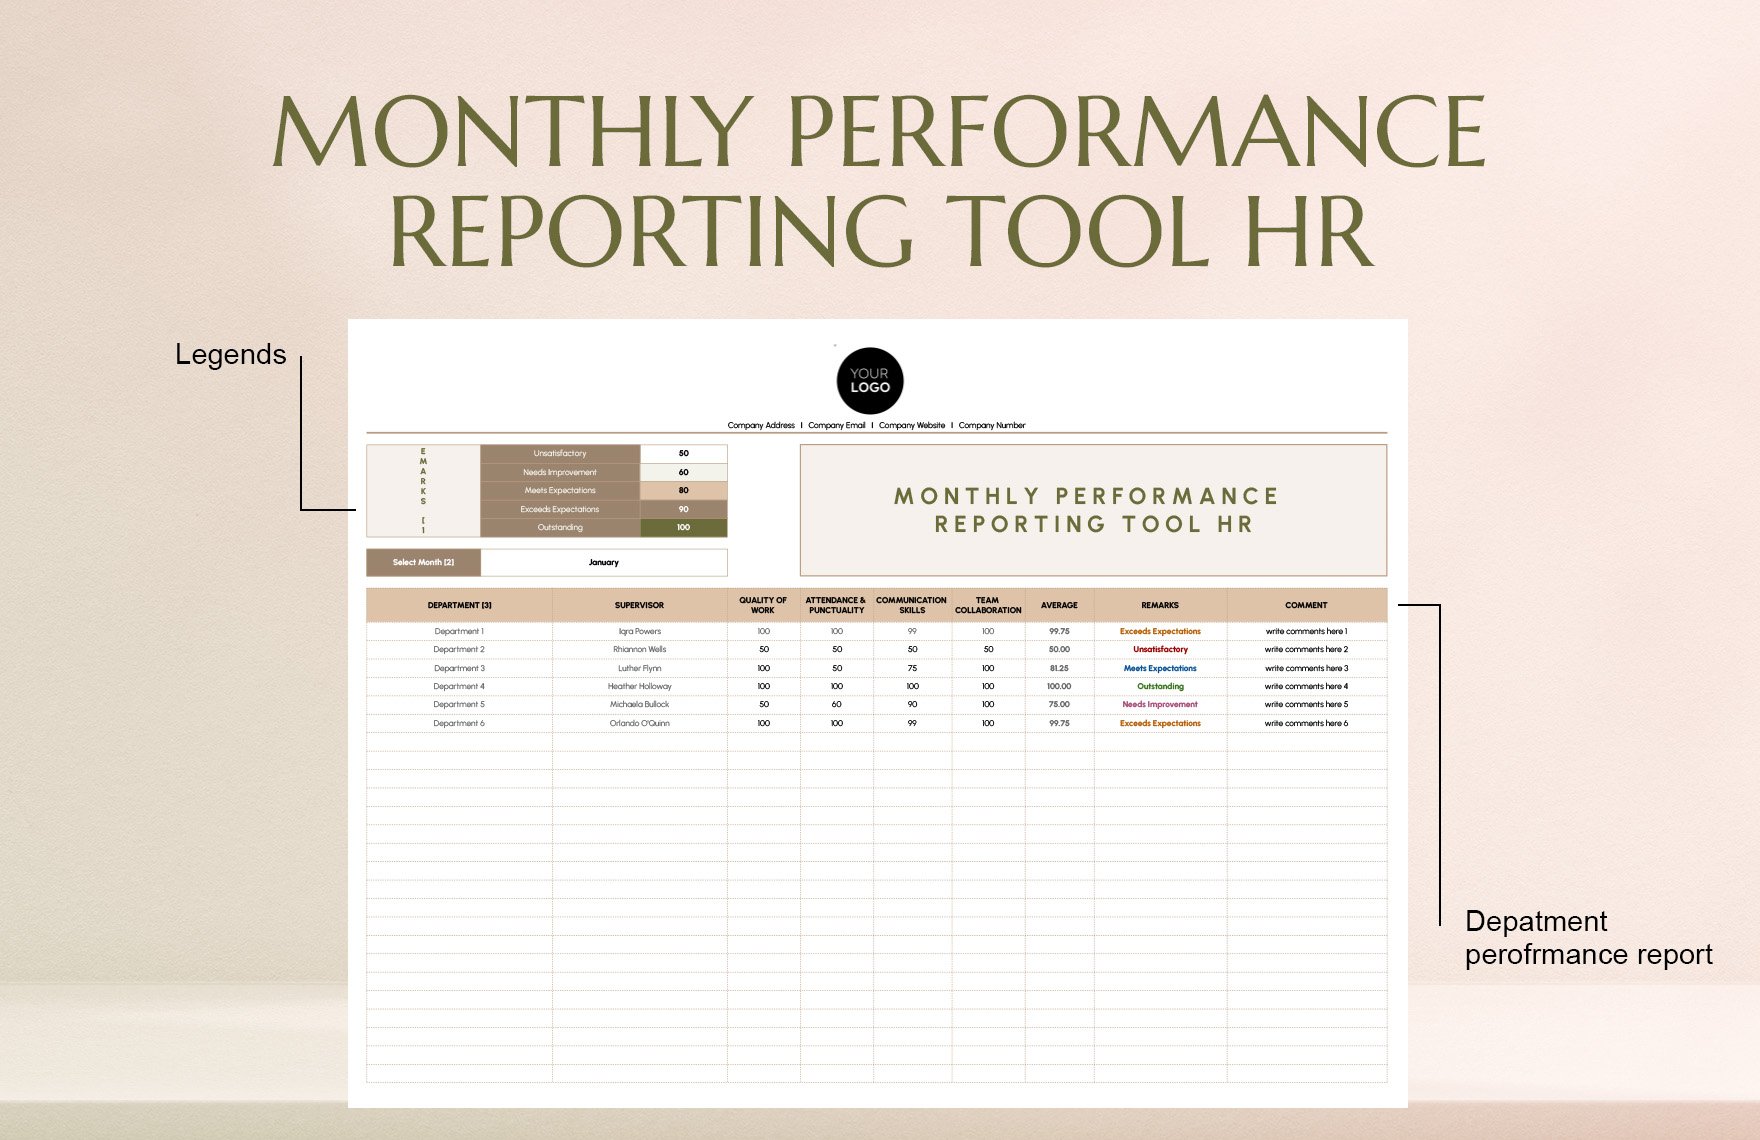 Monthly Performance Reporting Tool HR Template